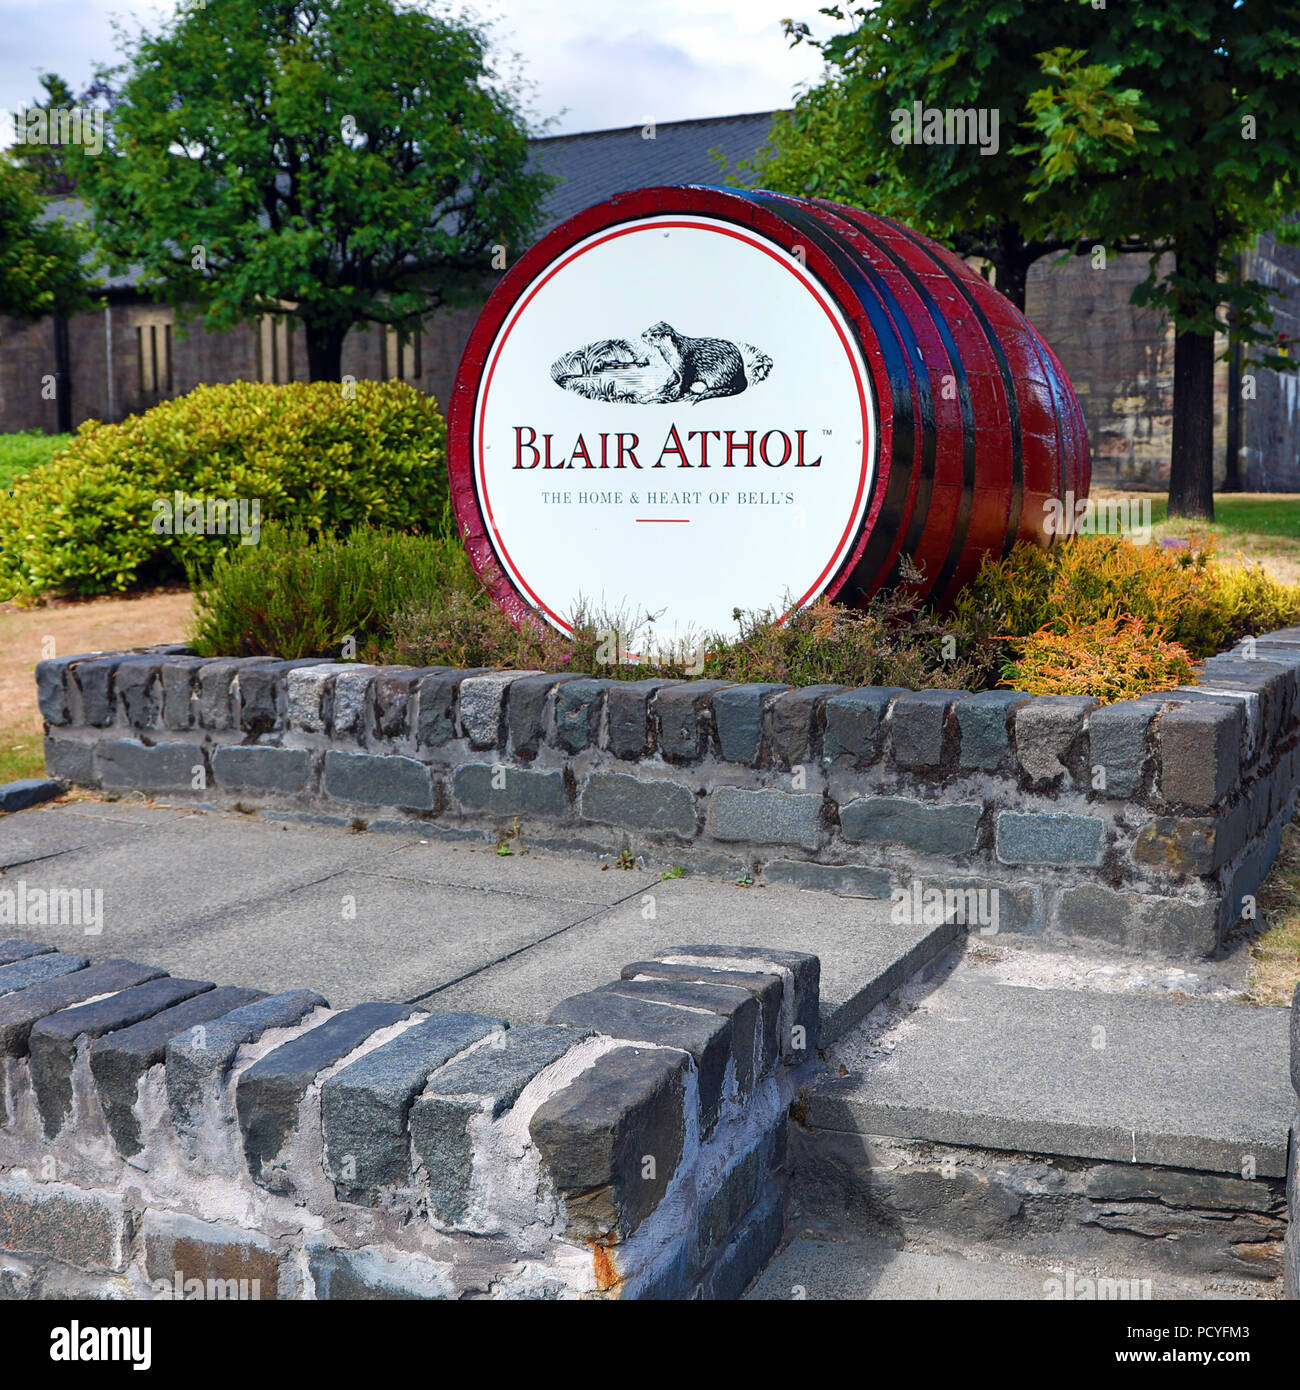 Blair Athol whisky distillery in Pitlochry, Perthshire, Scotland Stock Photo